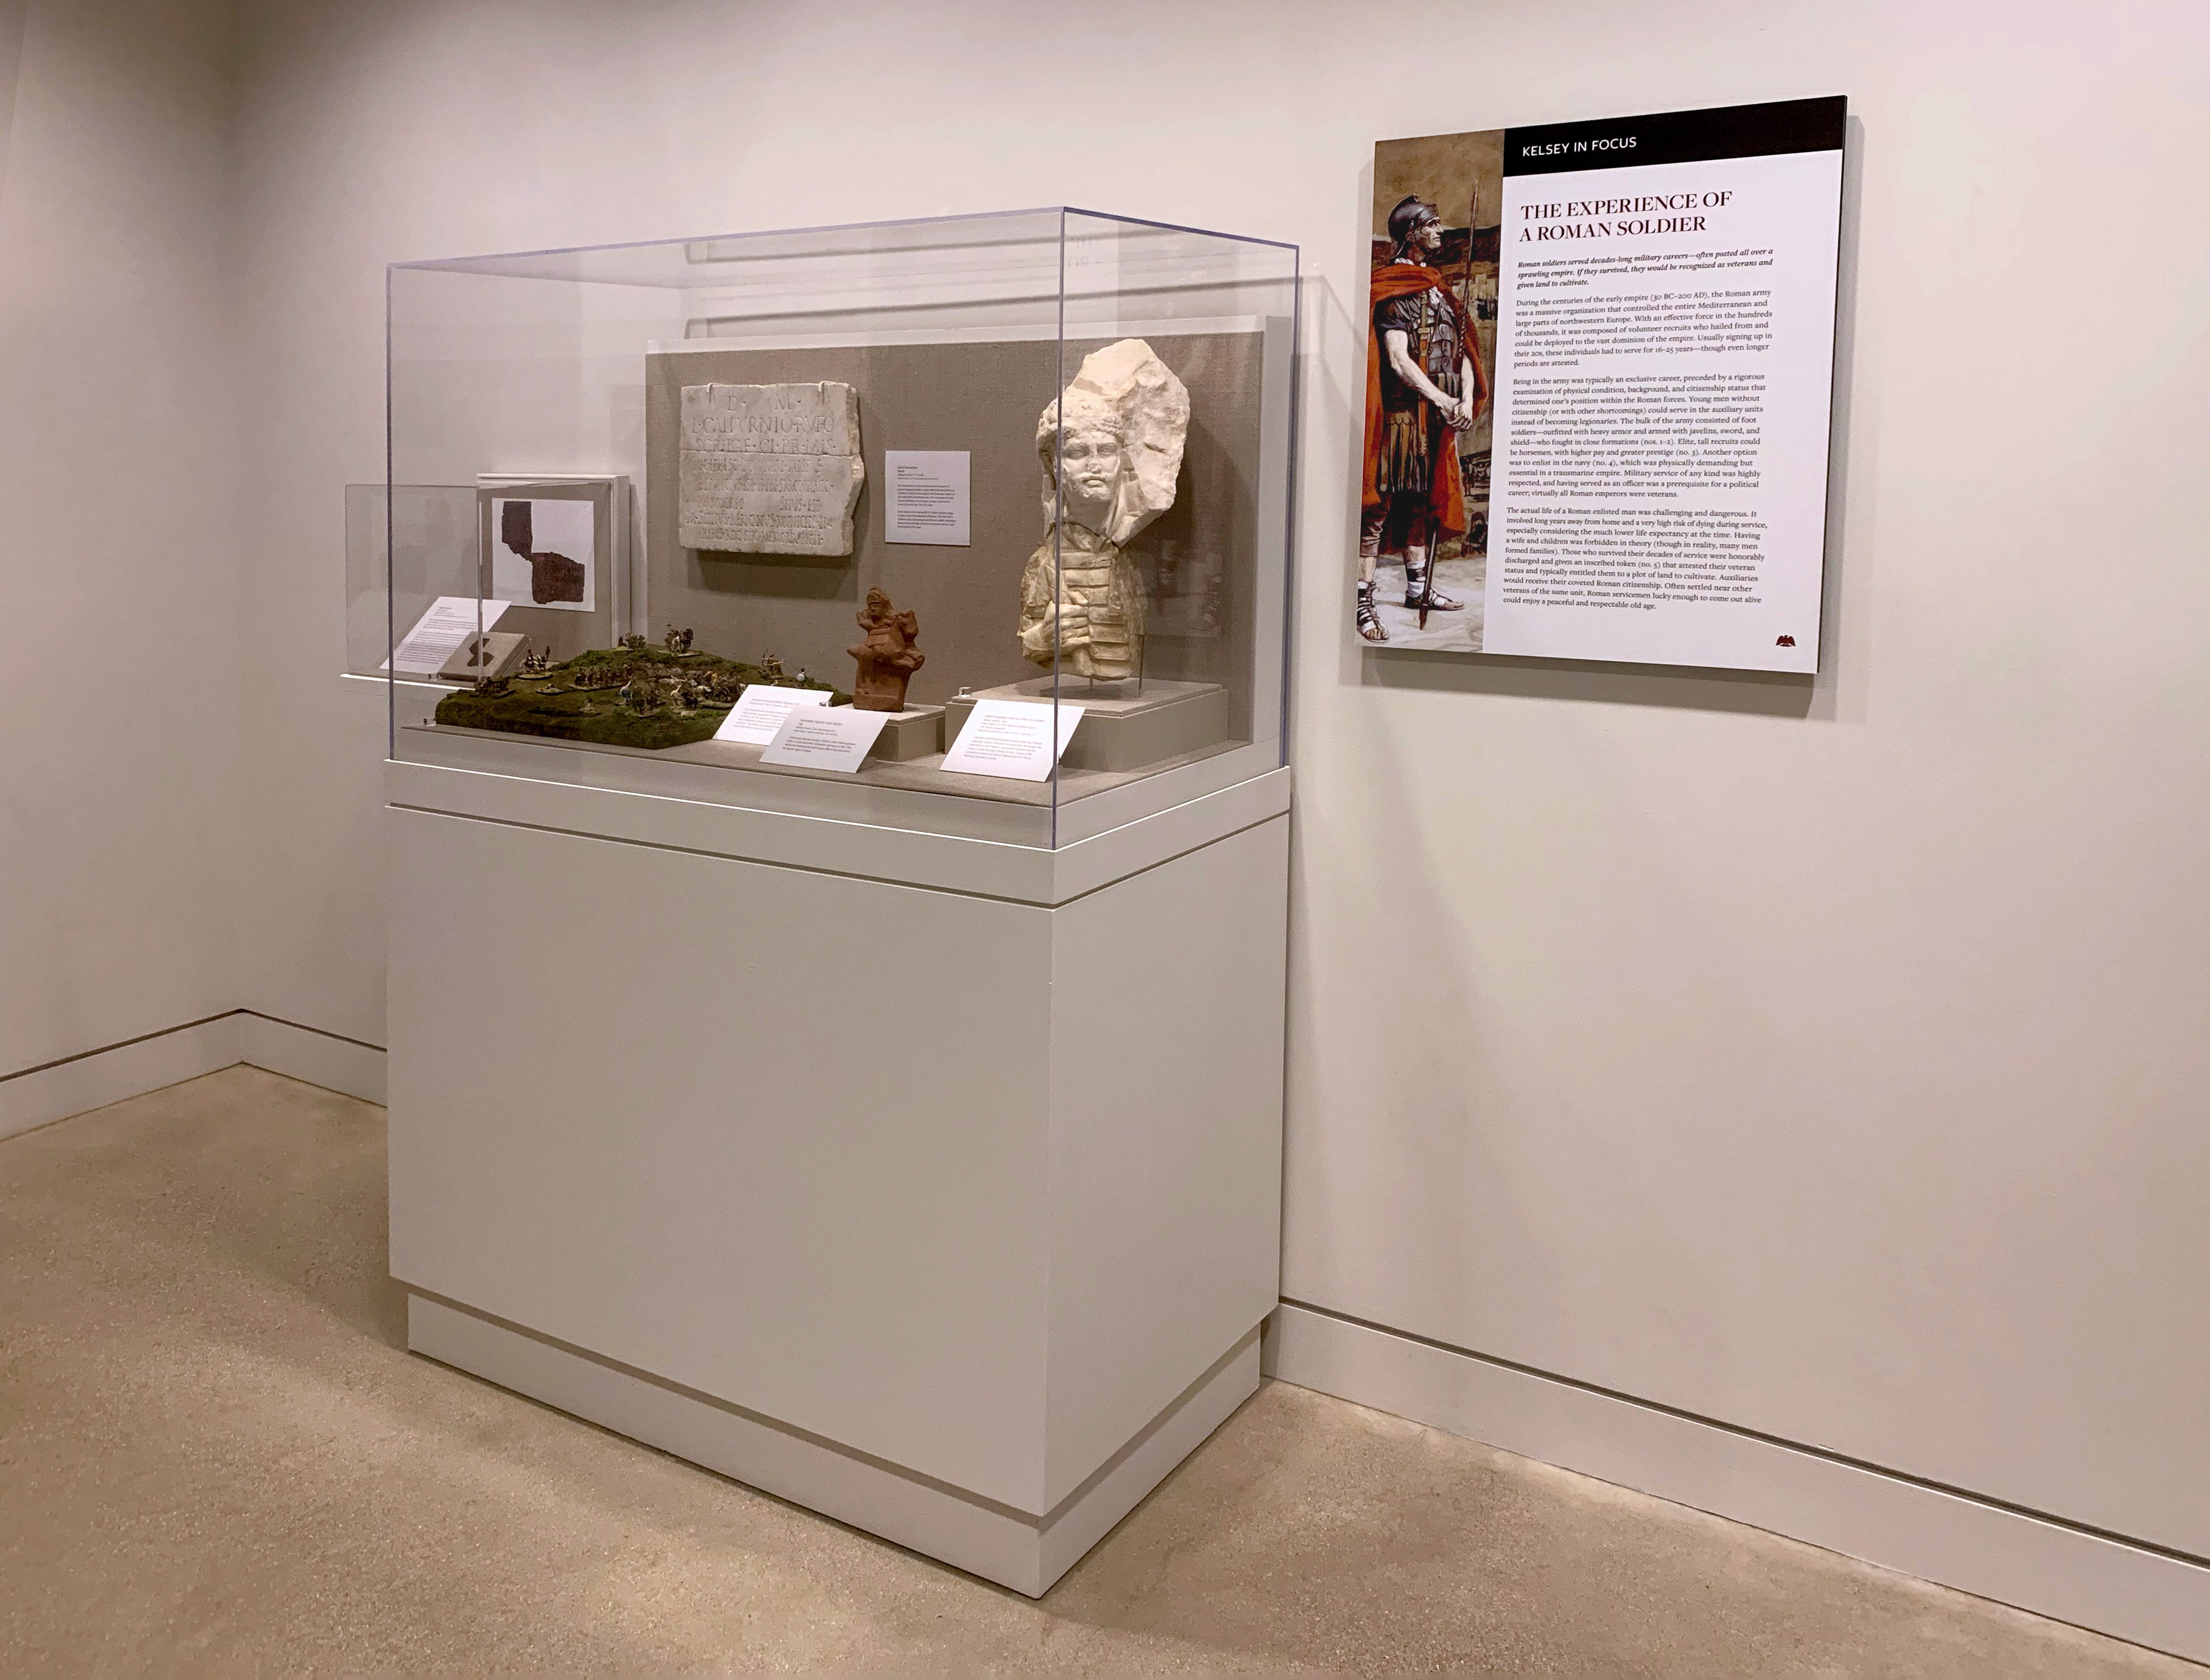 Museum vitrine showing a diorama of soldiers on a battlefield, a marble tombstone, a clay horseman figurine, and the head and soldier of a Roman soldier. On the wall next to the case is a panel titled “The Experience of a Roman Soldier.”